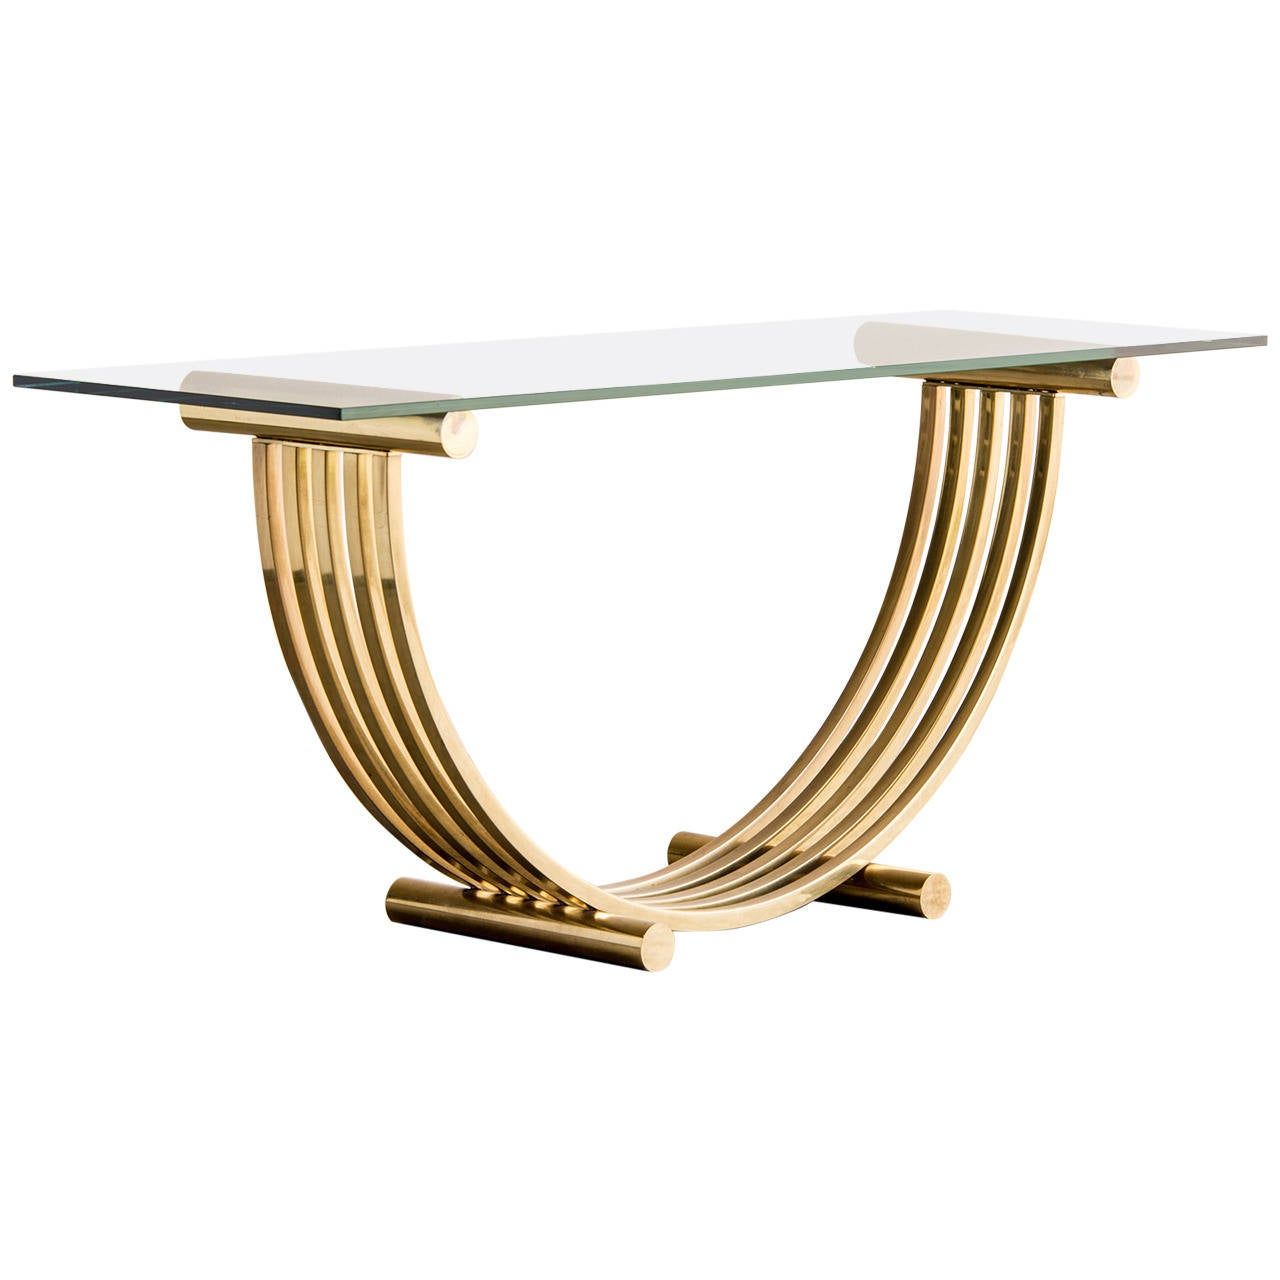 Romeo Rega Midcentury Modern Brass Glass Top Console Table Pertaining To Geometric Glass Top Gold Console Tables (View 11 of 20)